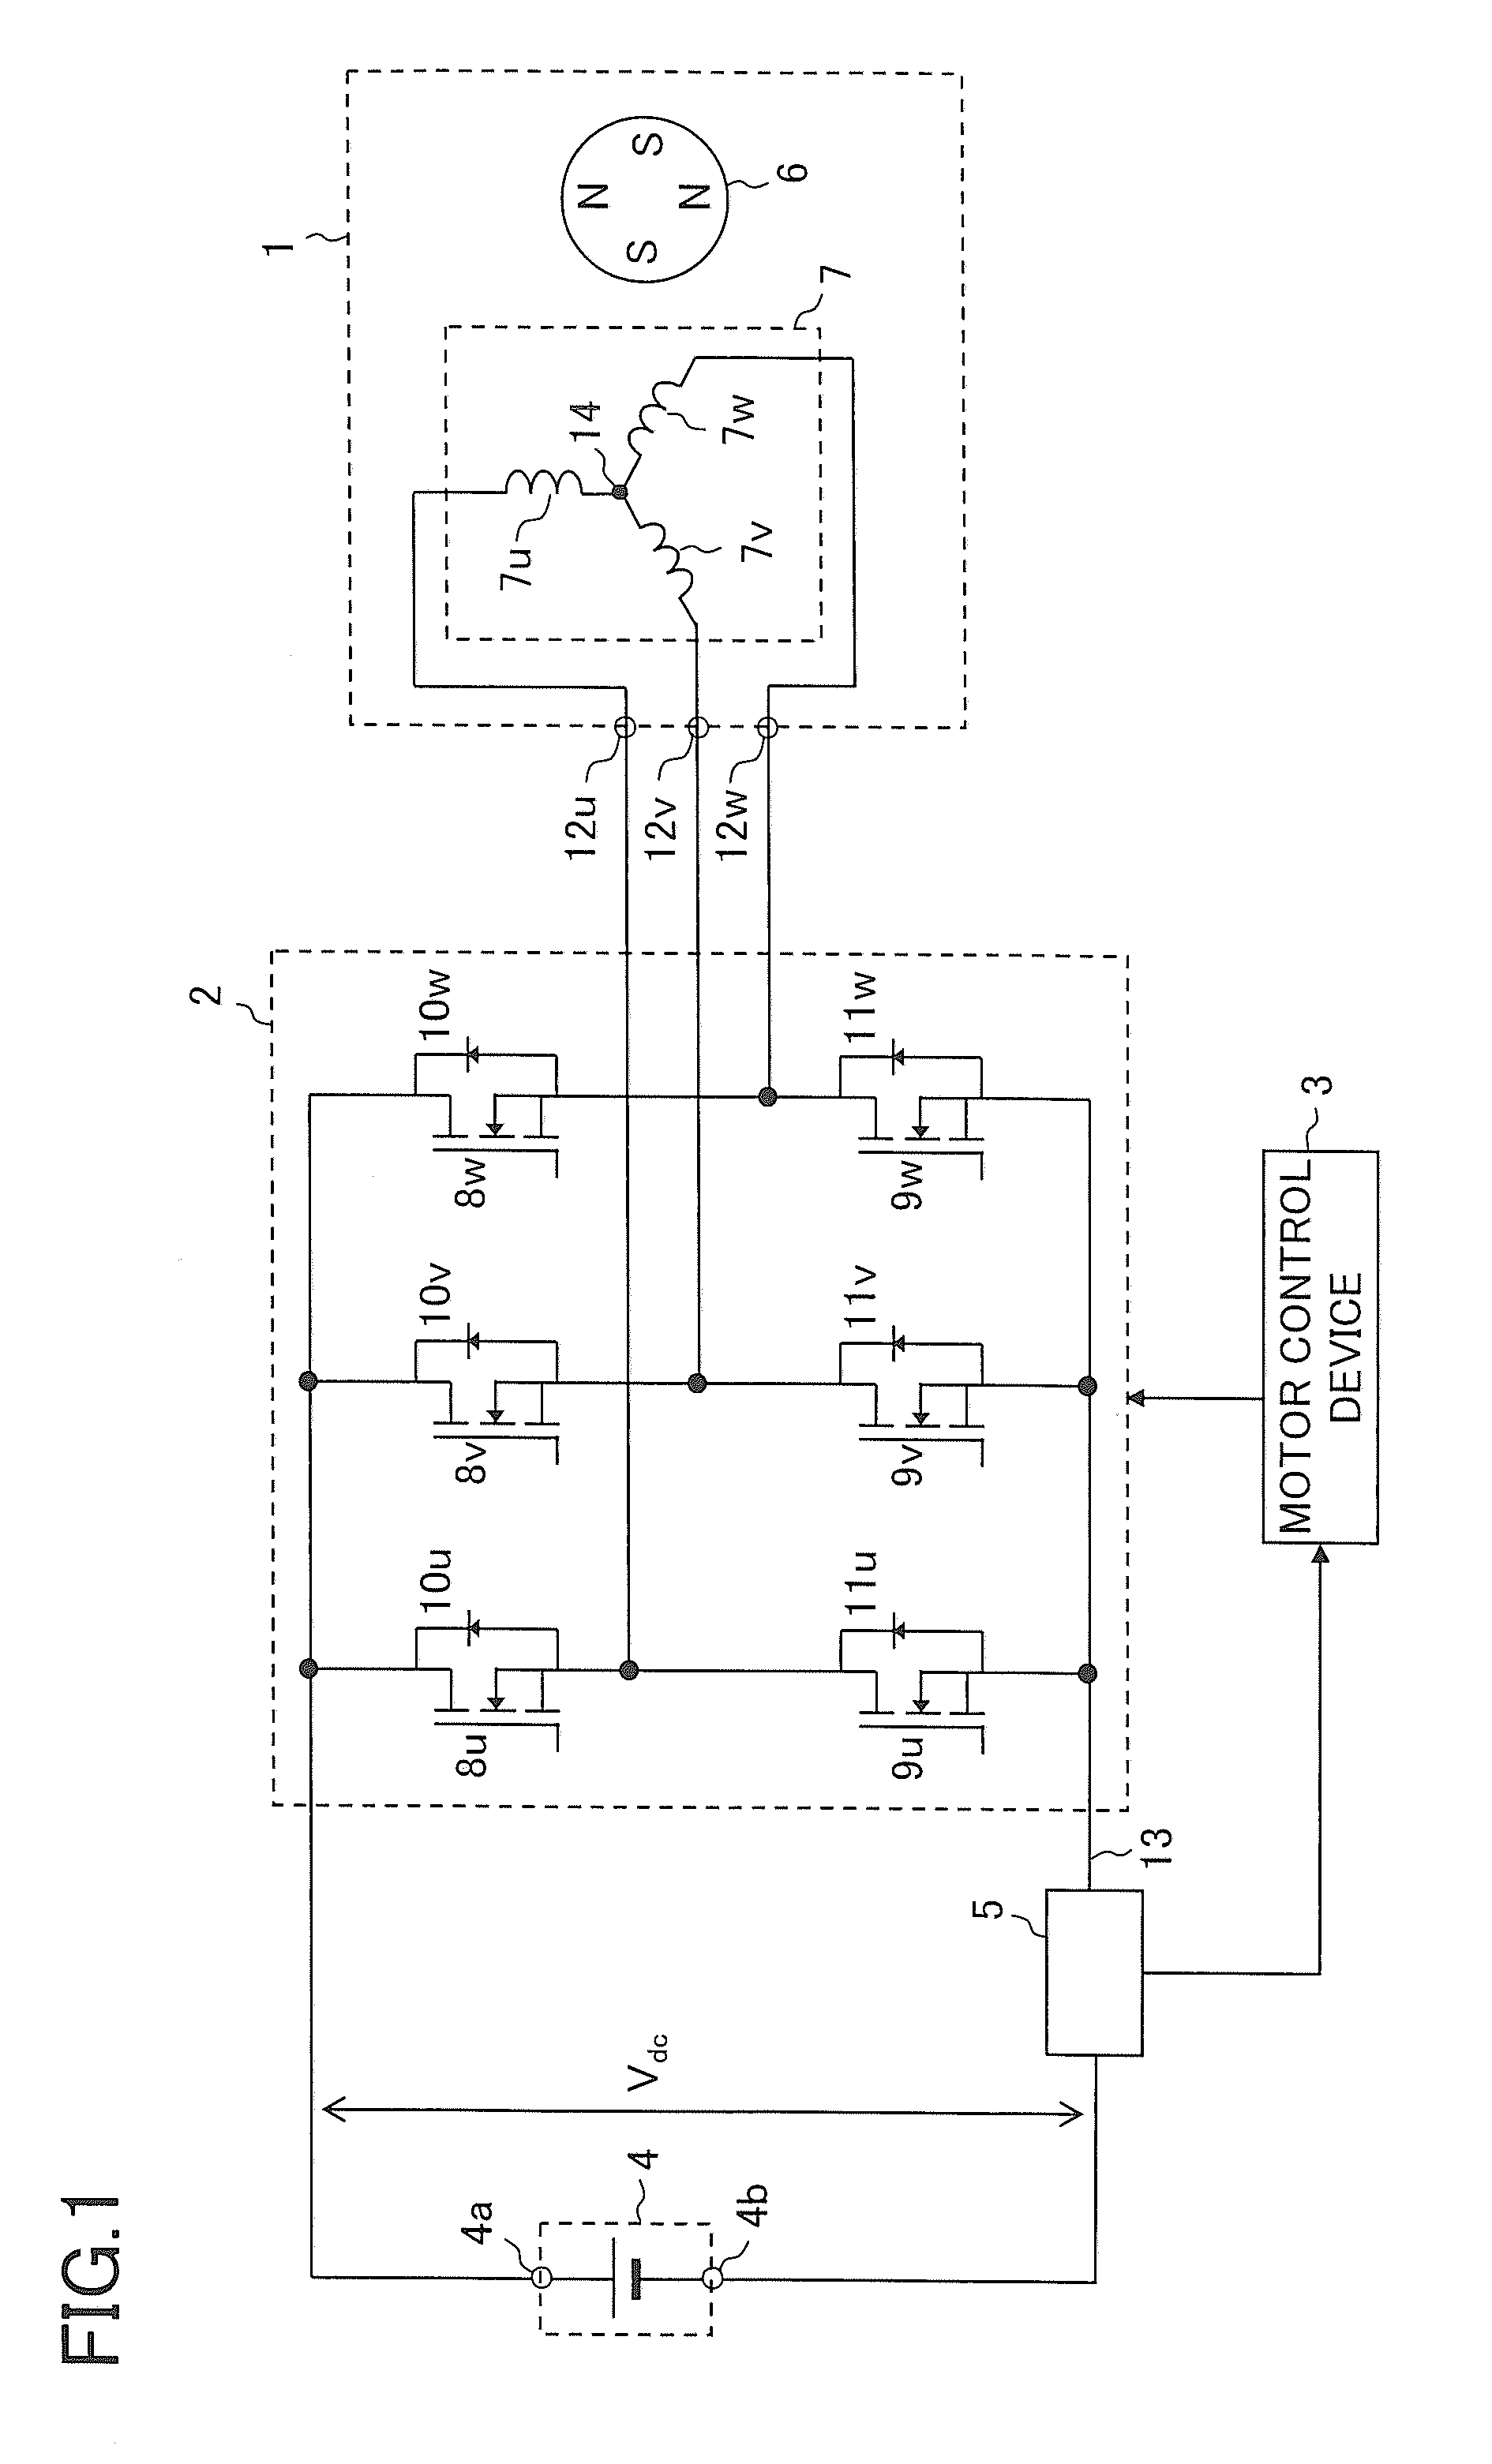 Motor control device, motor drive system and inverter control device